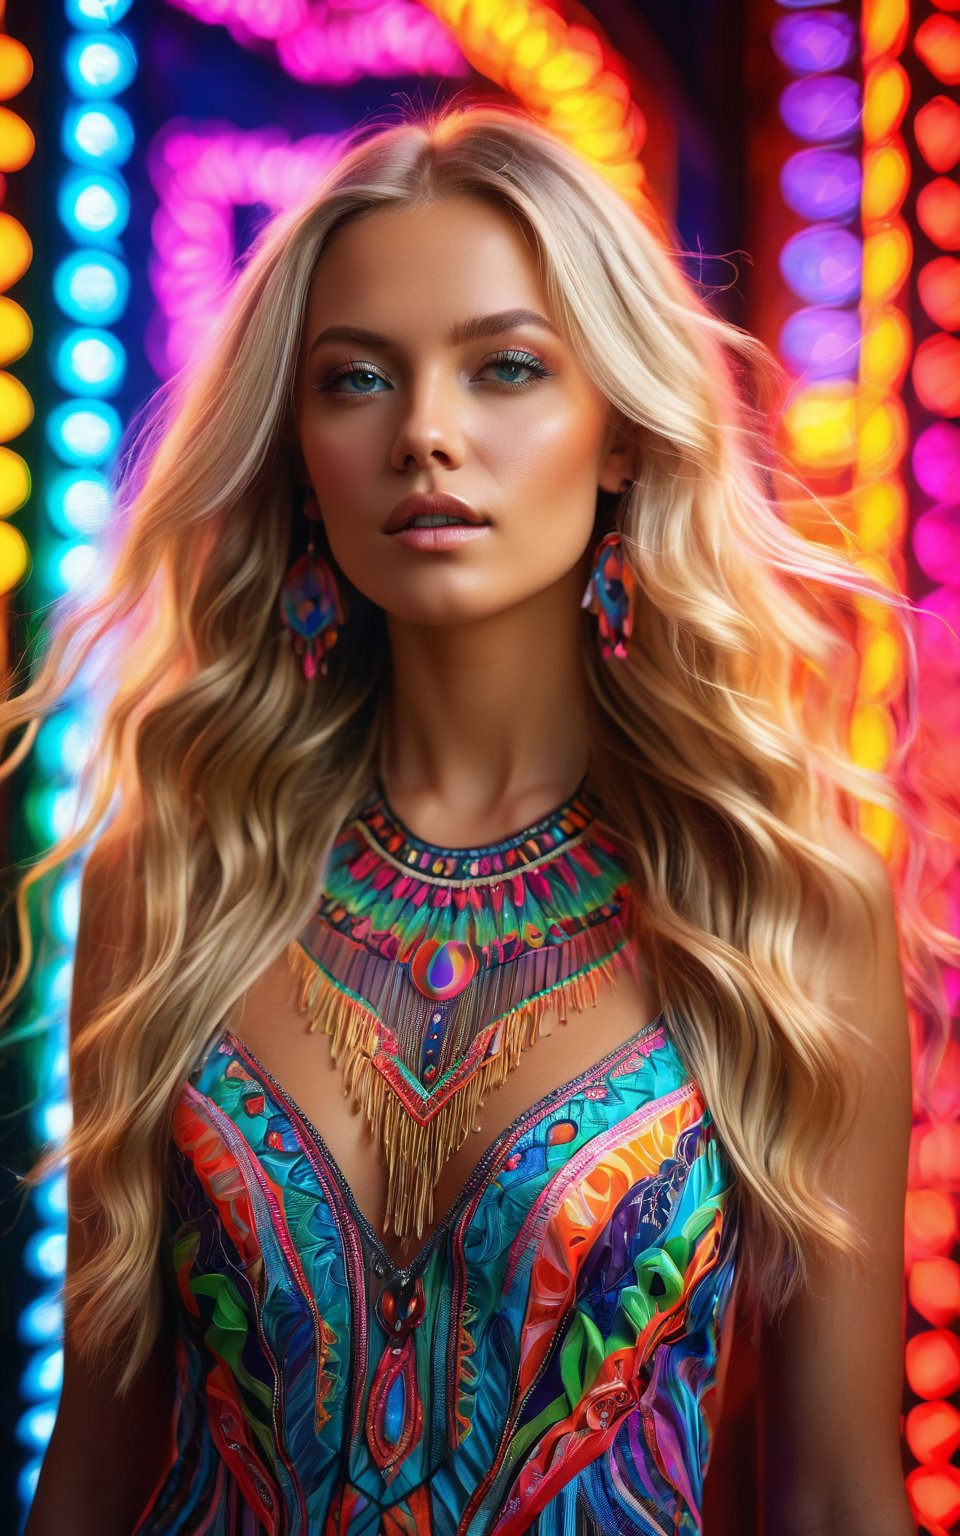 (best quality, 4K, 8K, high-resolution, masterpiece), ultra-detailed, realistic, photorealistic, portrait of a beautiful woman, long blonde hair with intricate patterns, tan skin, standing in front of colorful neon lights, psychedelic patterns, flowing hair, dress with detailed embroidery on the chest, light stripes, vibrant colors, intricate details, expressive eyes, high detail, high resolution, dynamic composition, modern style, ethereal atmosphere, soft lighting.